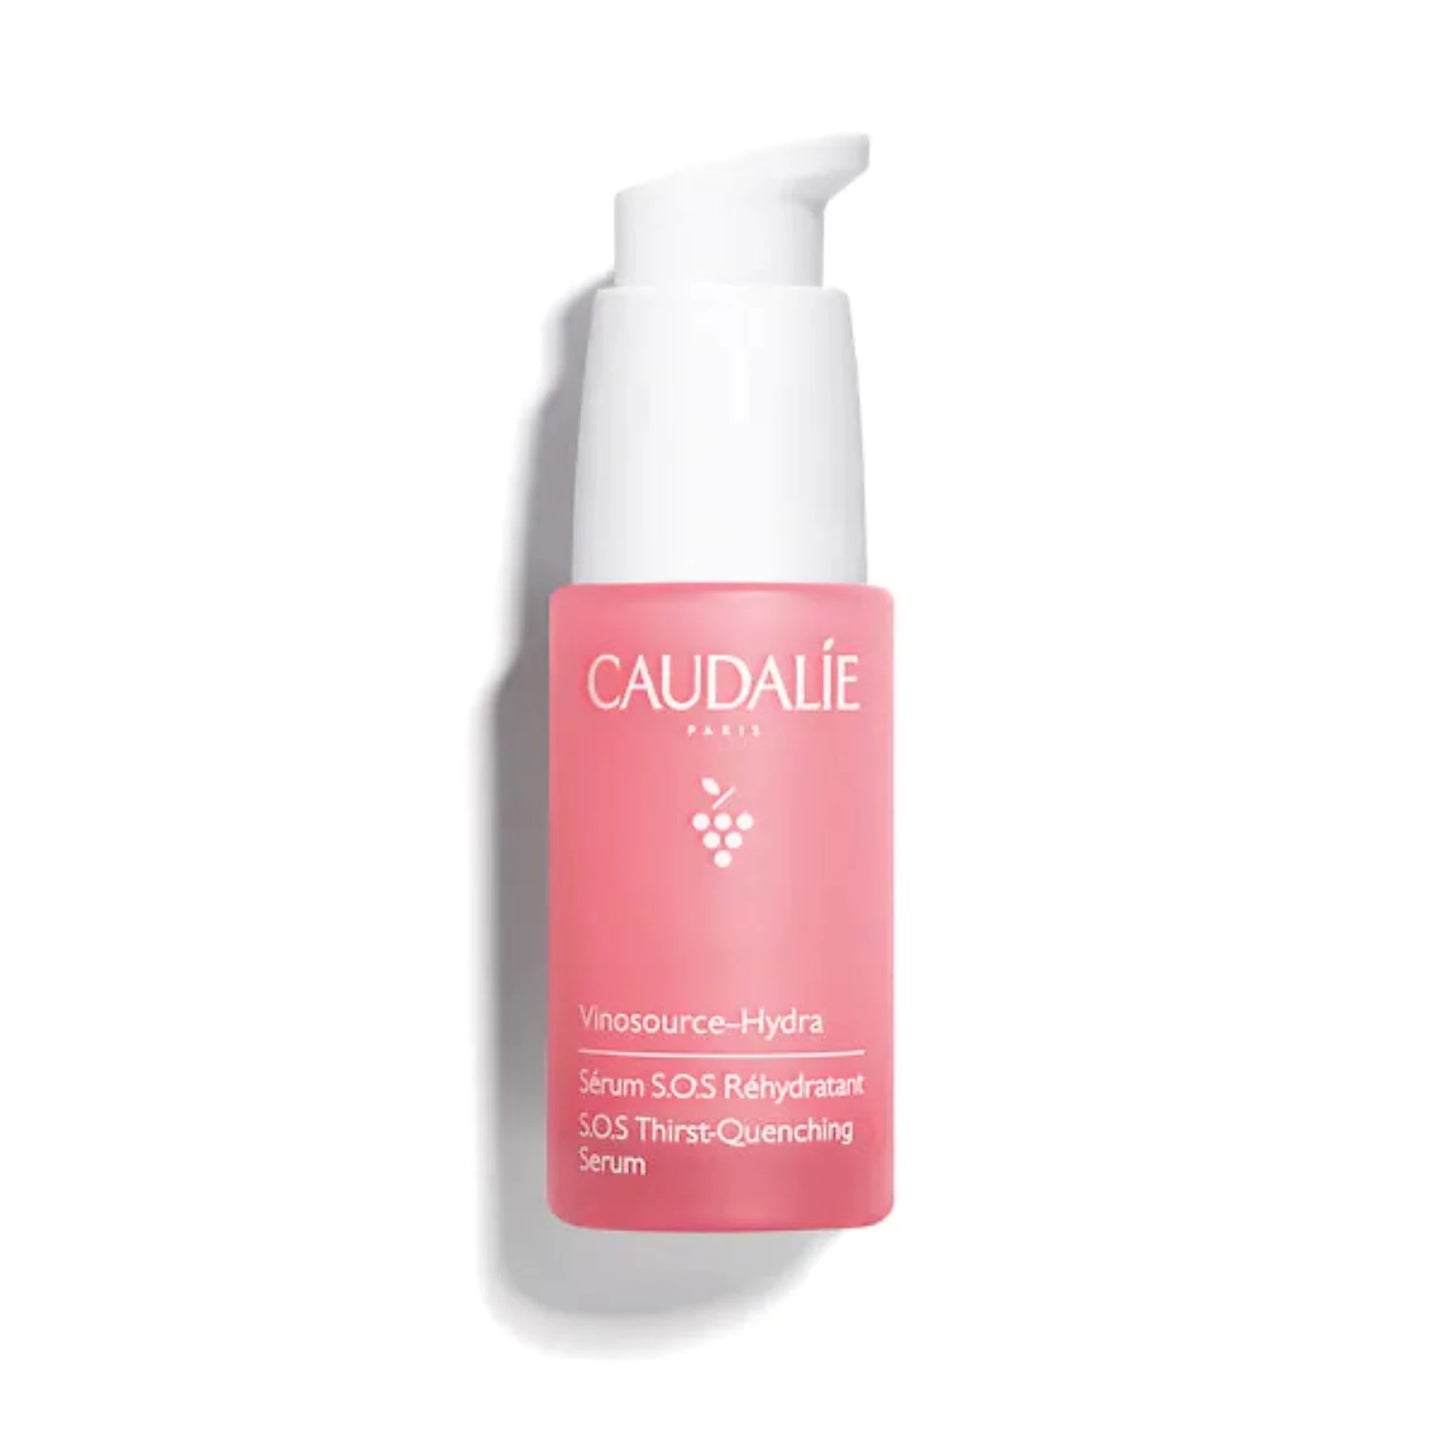 Caudalie Vinosource-Hydra SOS Hydrating Hyaluronic Acid Serum keeps you skin hydrated though out the day.